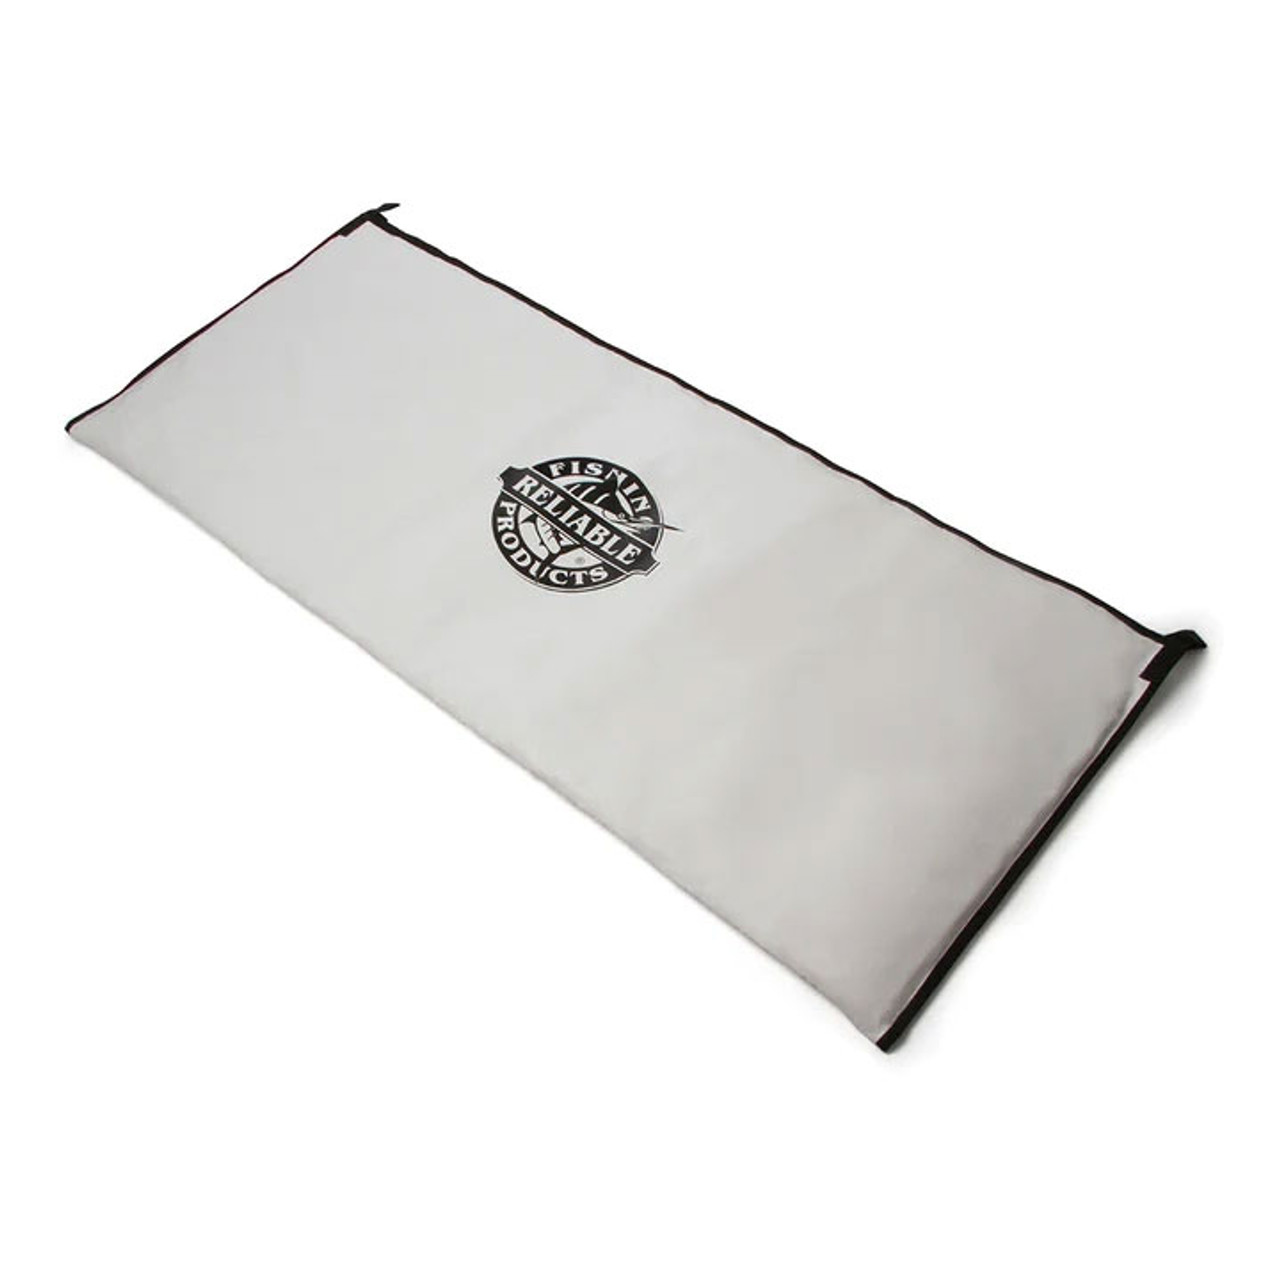 Reliable Fishing Products Insulated Bill Fish Blanket - 40x90